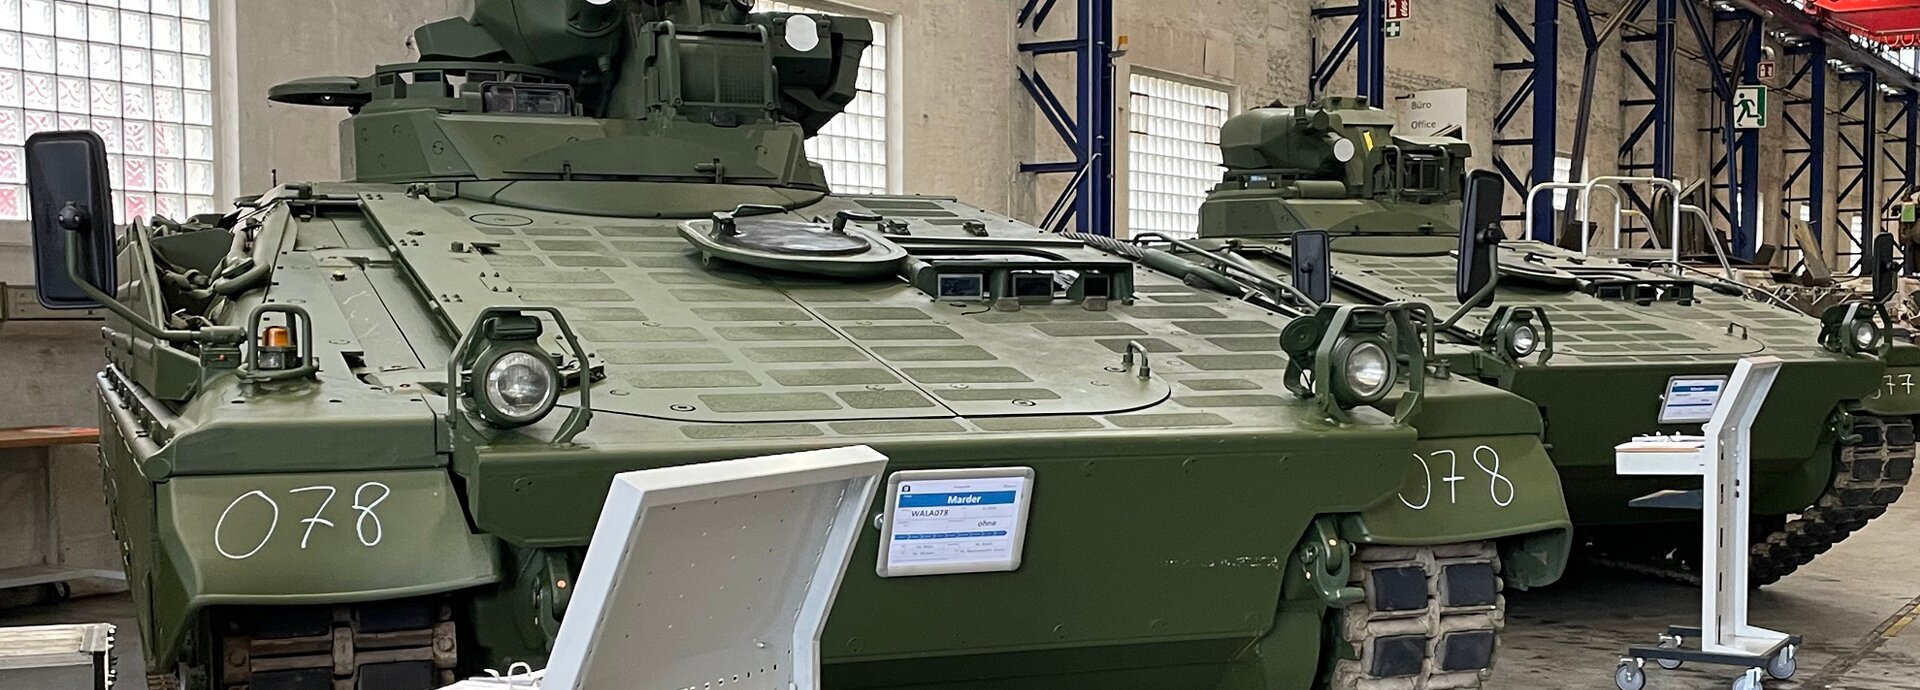 Rheinmetall to Supply 40 More Marder Infantry Fighting Vehicles to